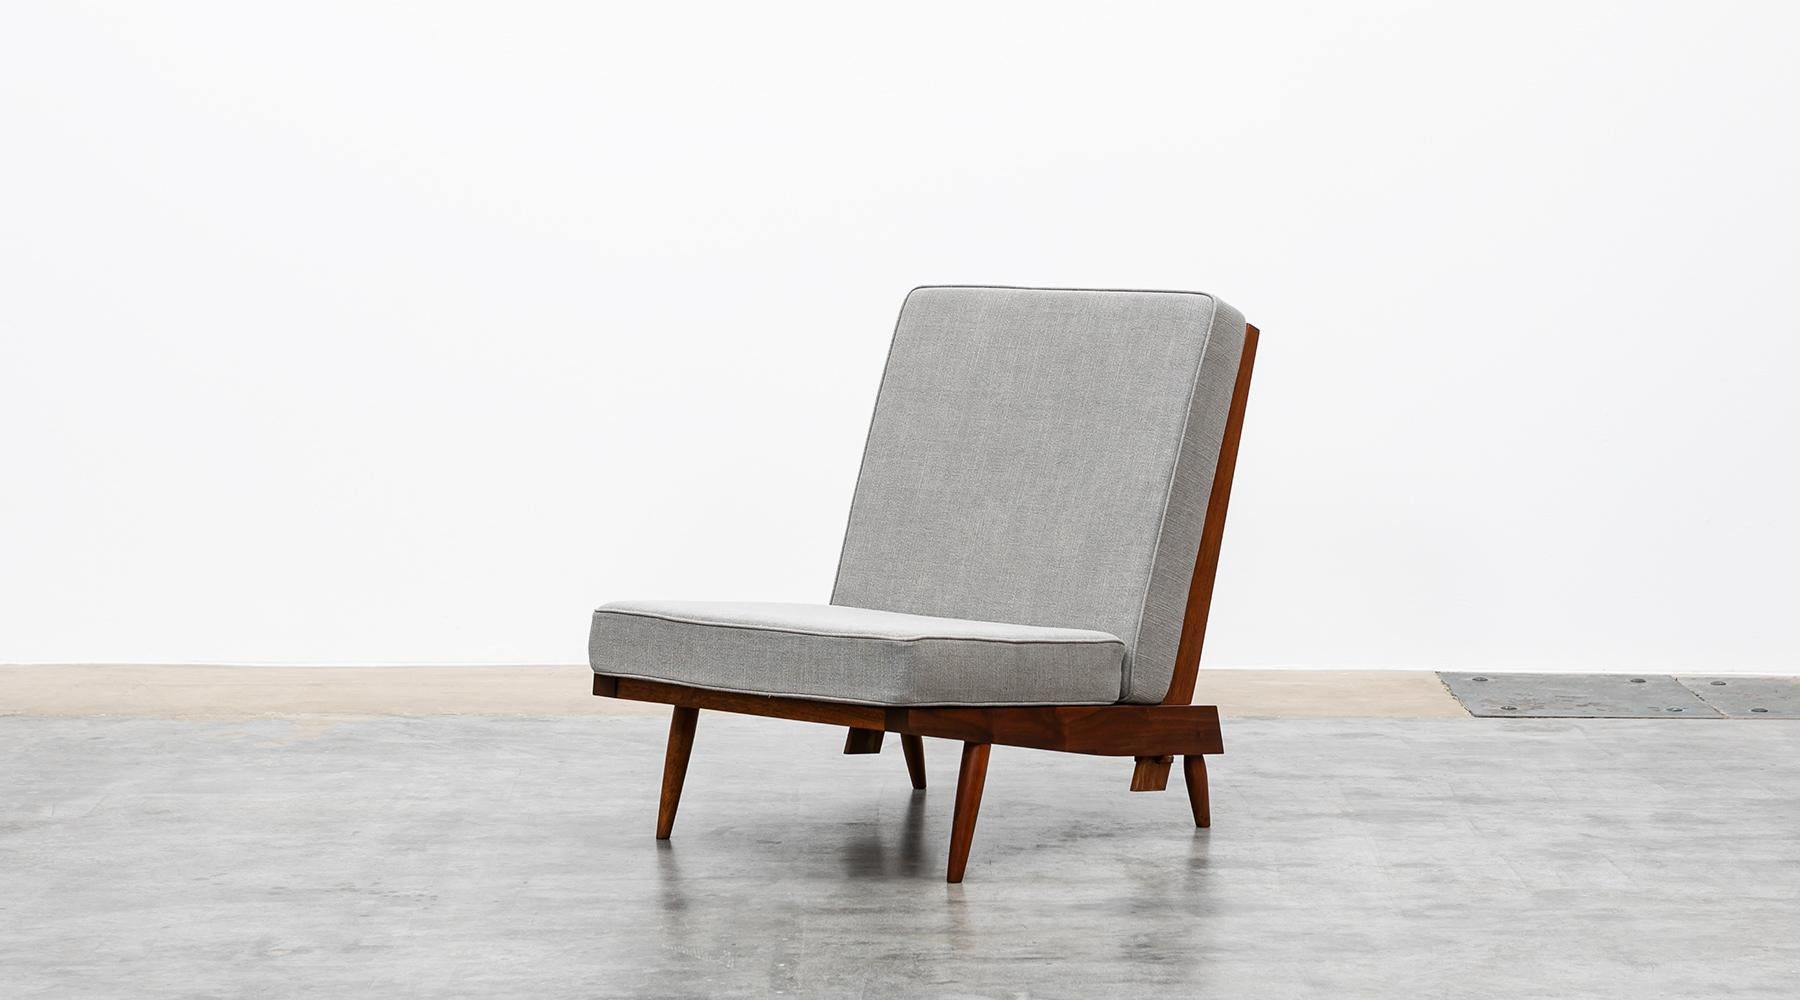 Lounge chair in walnut, new upholstery in grey by George Nakashima, USA, 1962.

Magnificent single lounge chair crafted from American walnut by George Nakashima himself in elaborate handwork. The light feet and frame combined with the generous